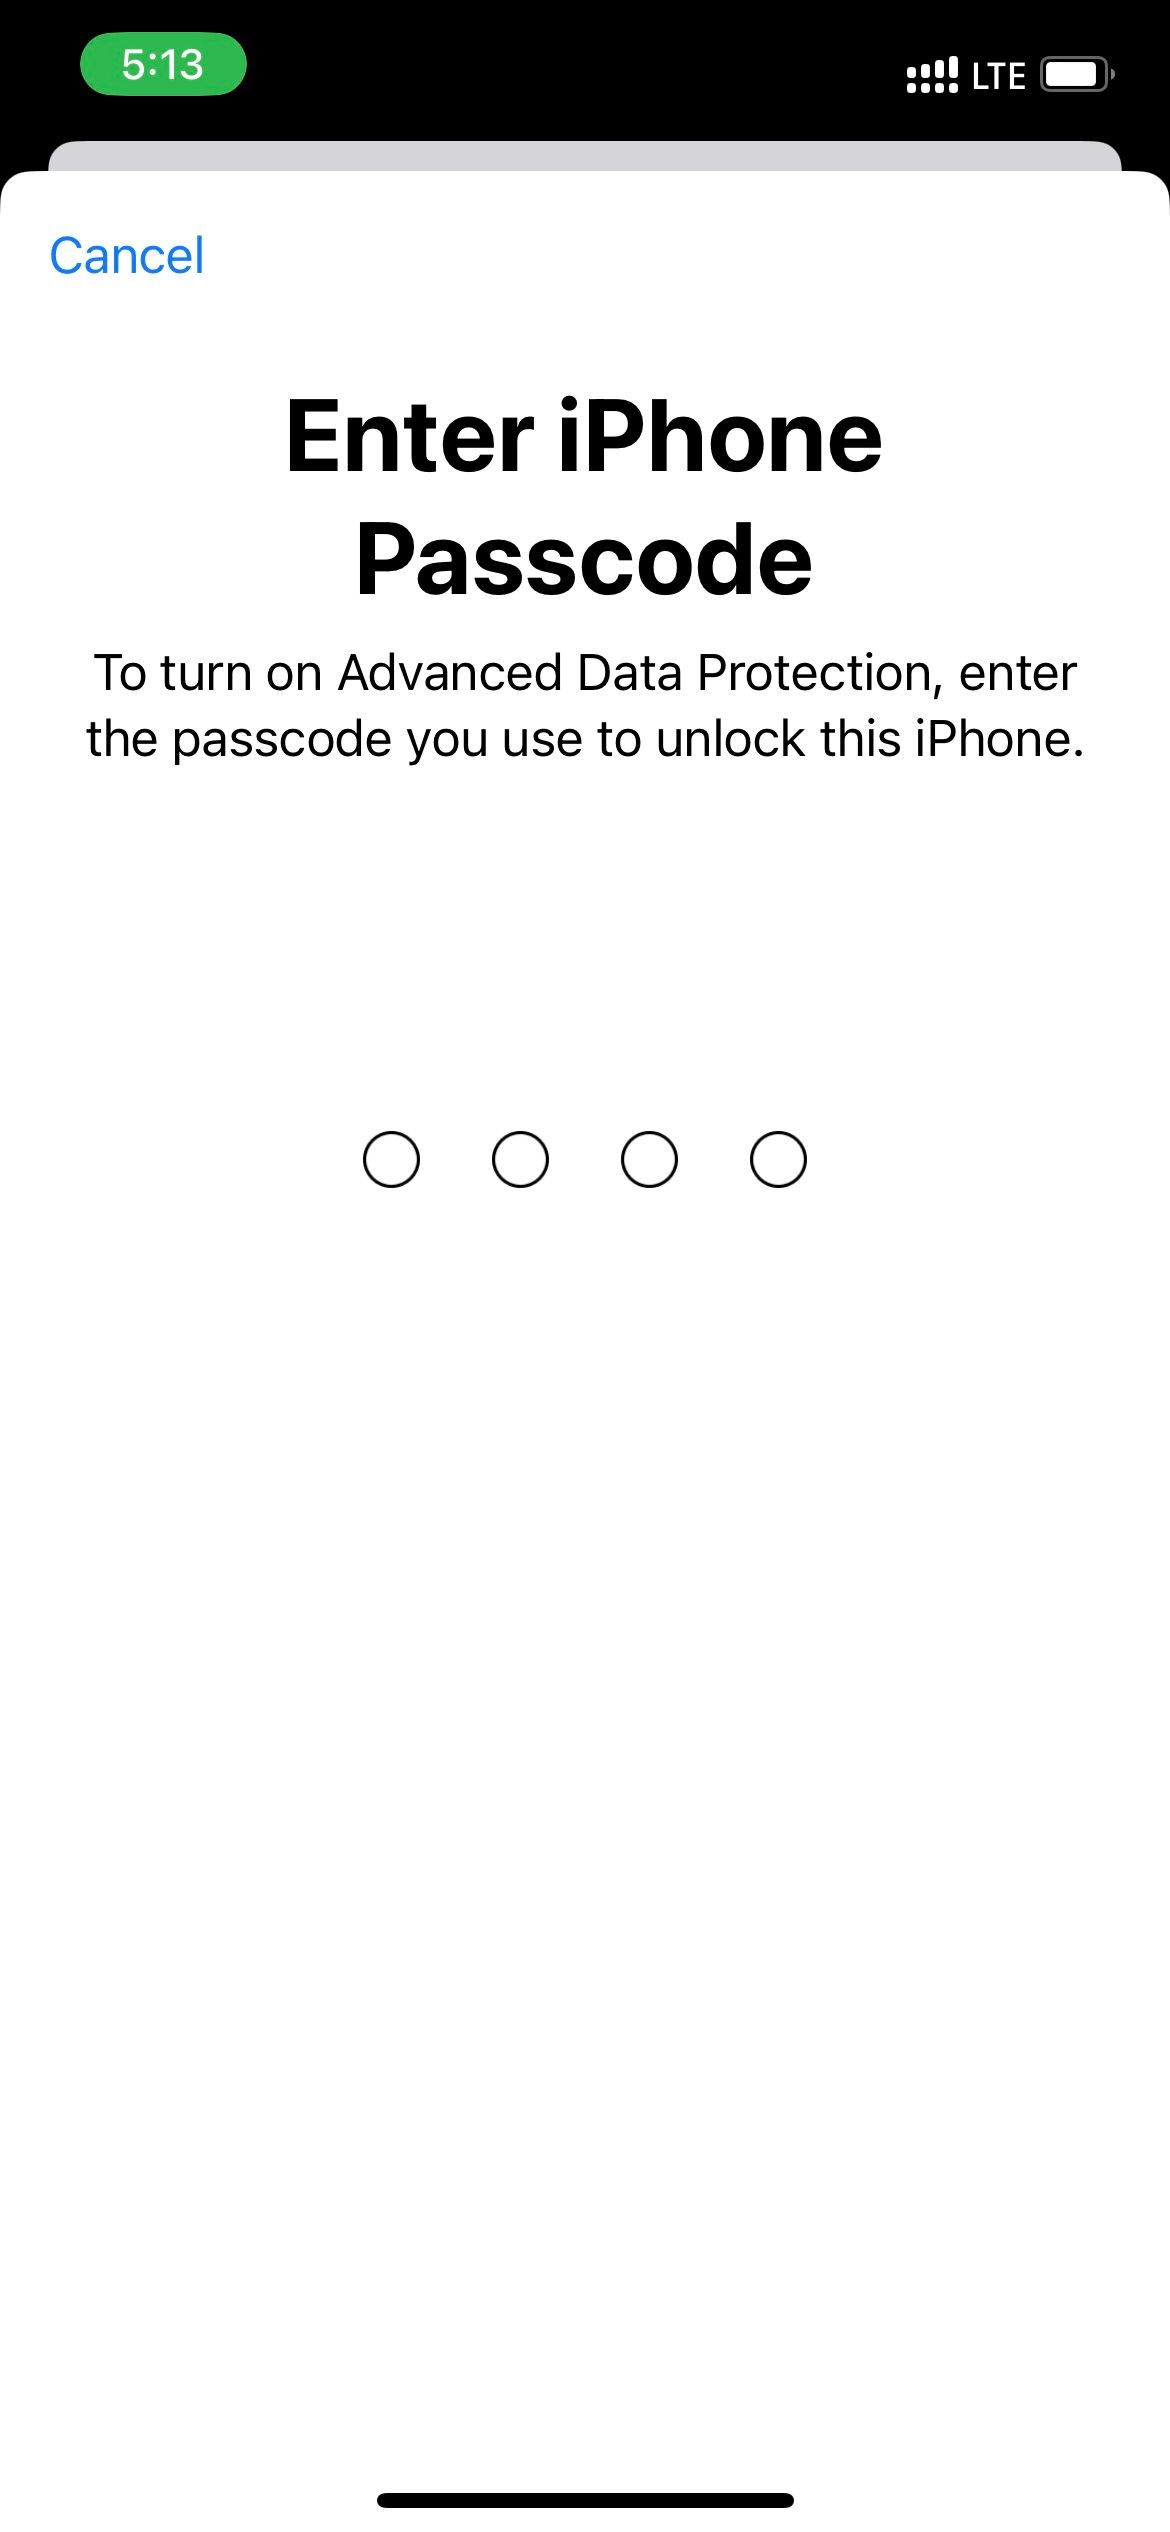 Enter your iPhone Passcode when required